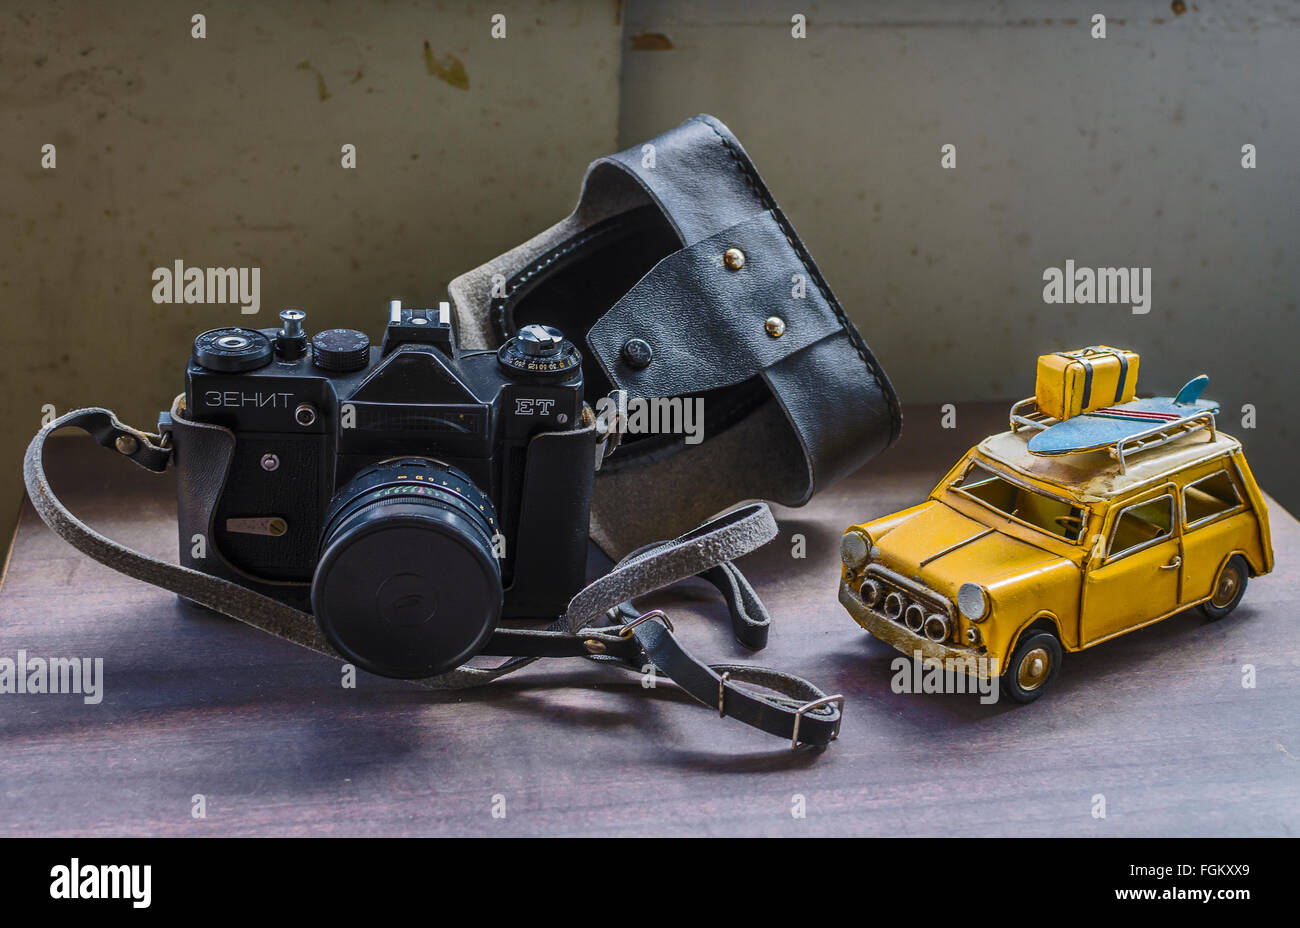 View of an old camera and a yellow toy car Stock Photo